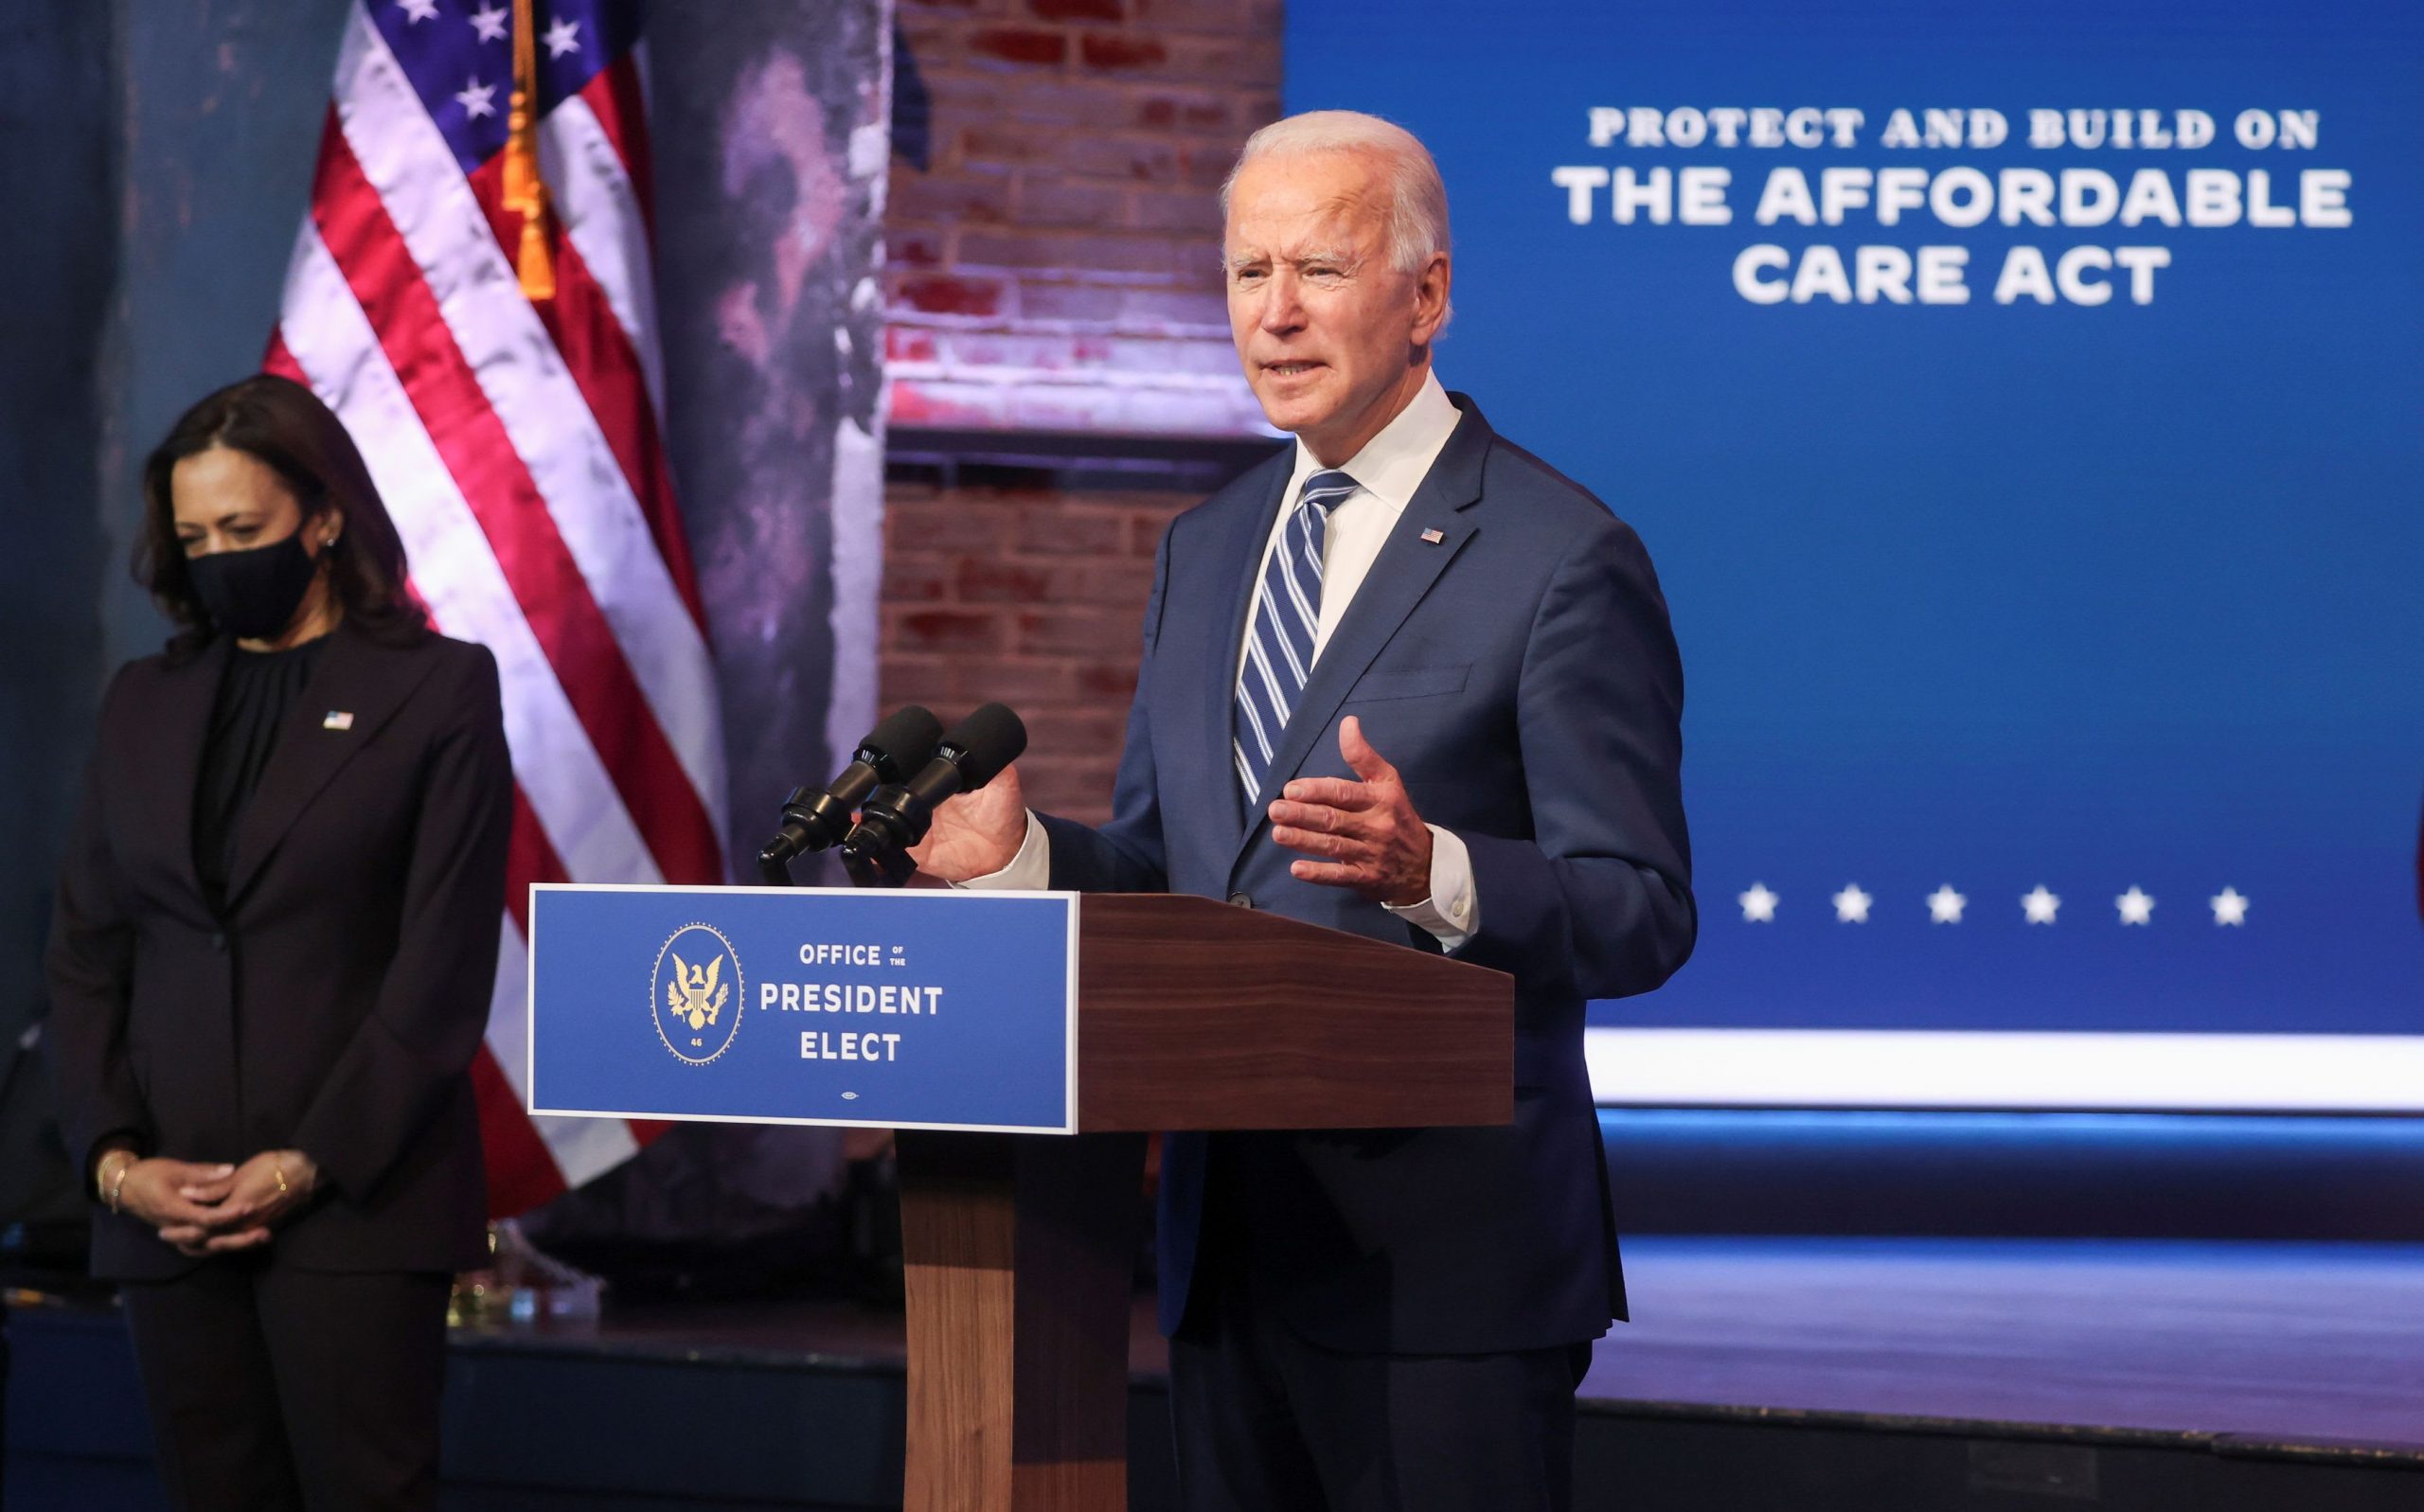 Biden says ‘this is an embarrassment’ that Trump will not accept change